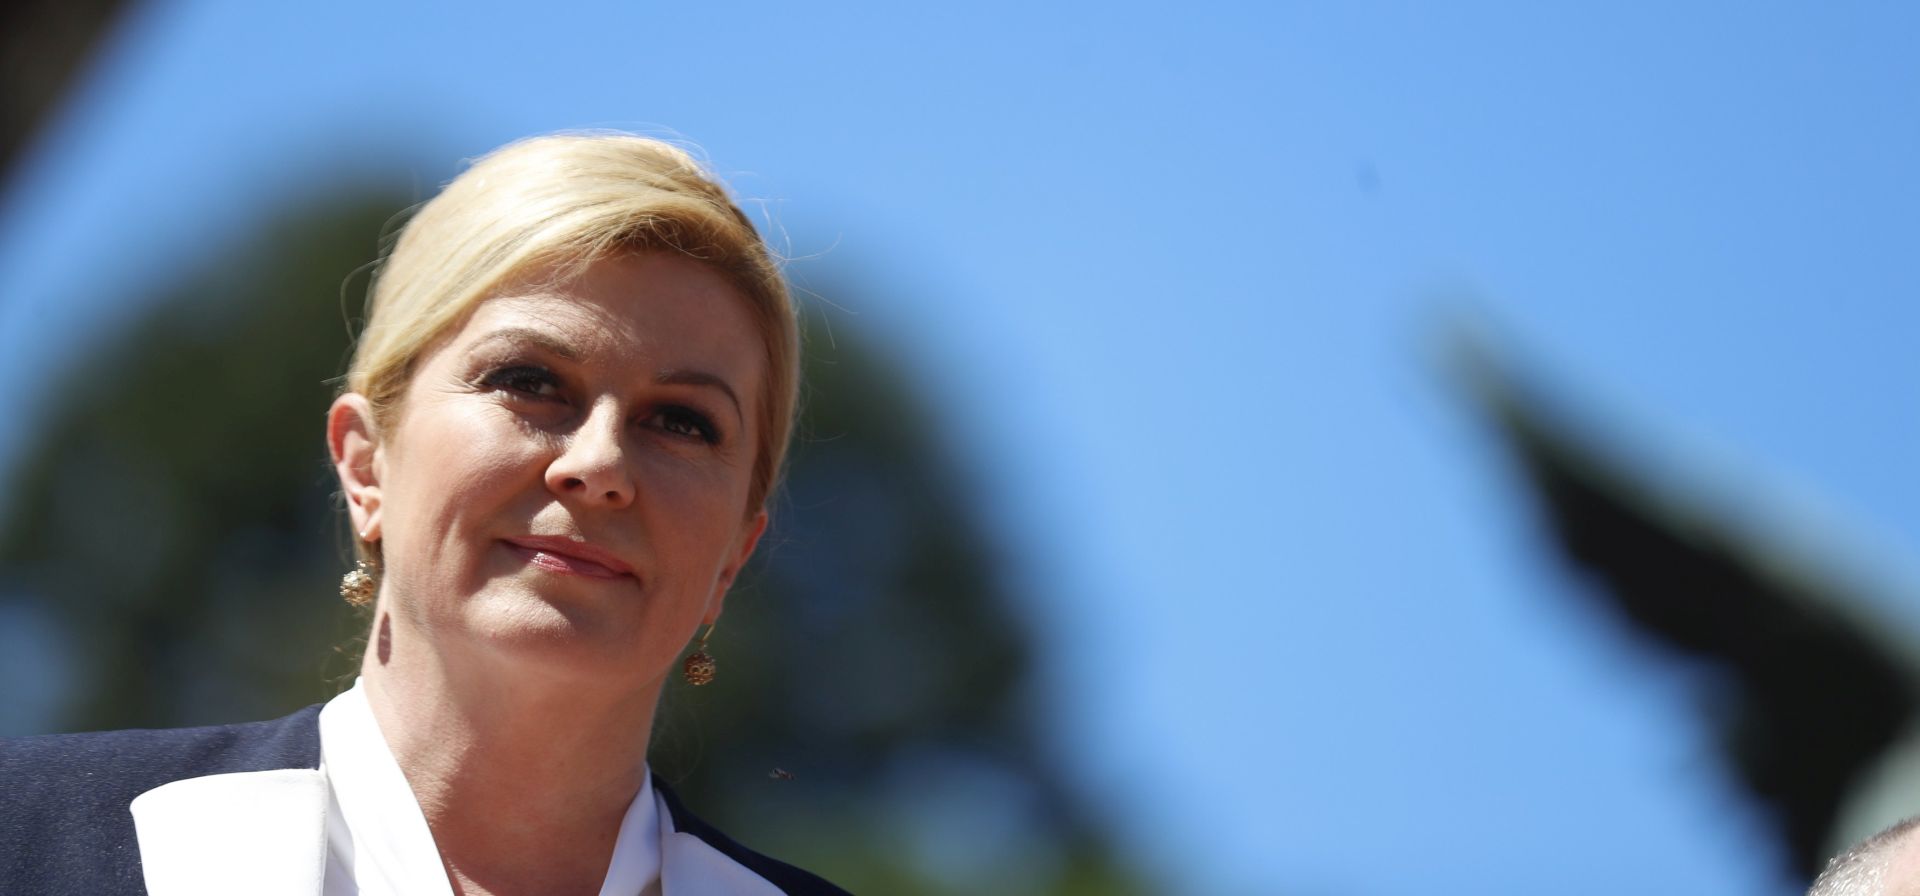 epa06598675 The President of Croatia Kolinda Grabar-Kitarovic participates in a tribute to the monument of General Jose de San Martin, in the Plaza San Martin, in Buenos Aires, Argentina, 12 March 2018. Kolinda Grabar-Kitarovic made today an act of homage in Buenos Aires to the monument of General Jose de San Martin, a distinguished hero of Argentine independence, after which he will meet with his counterpart Mauricio Macri, as part of his official visit to the country.  EPA/David Fernandez